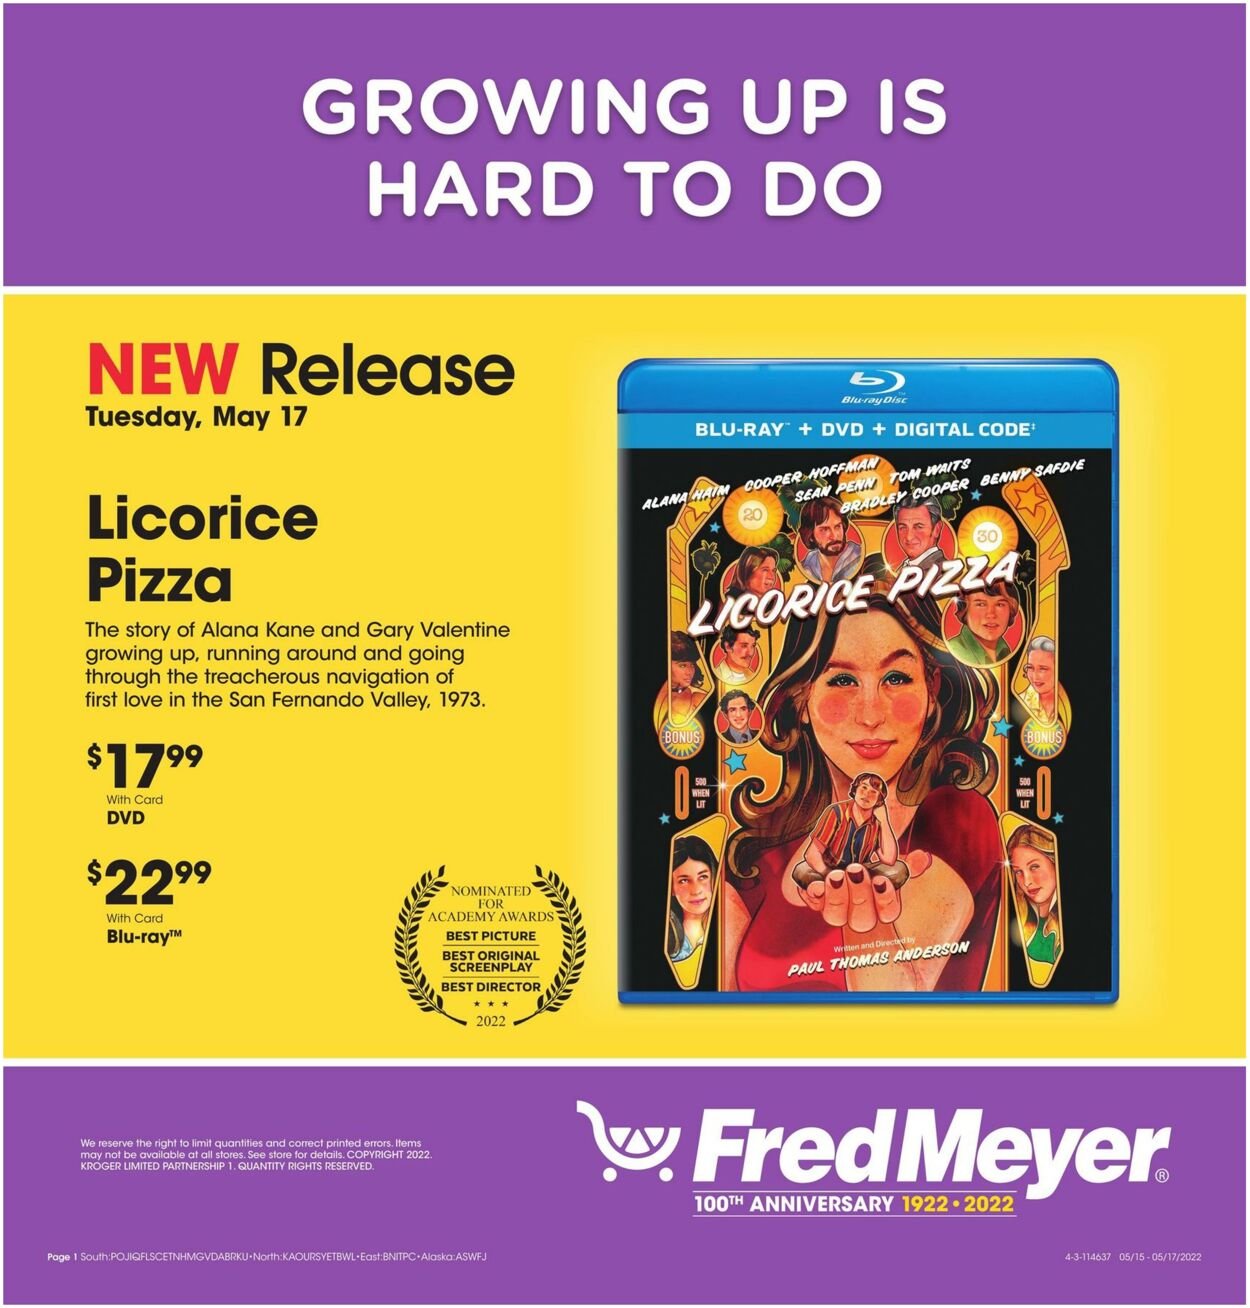 Fred Meyer Promotional weekly ads